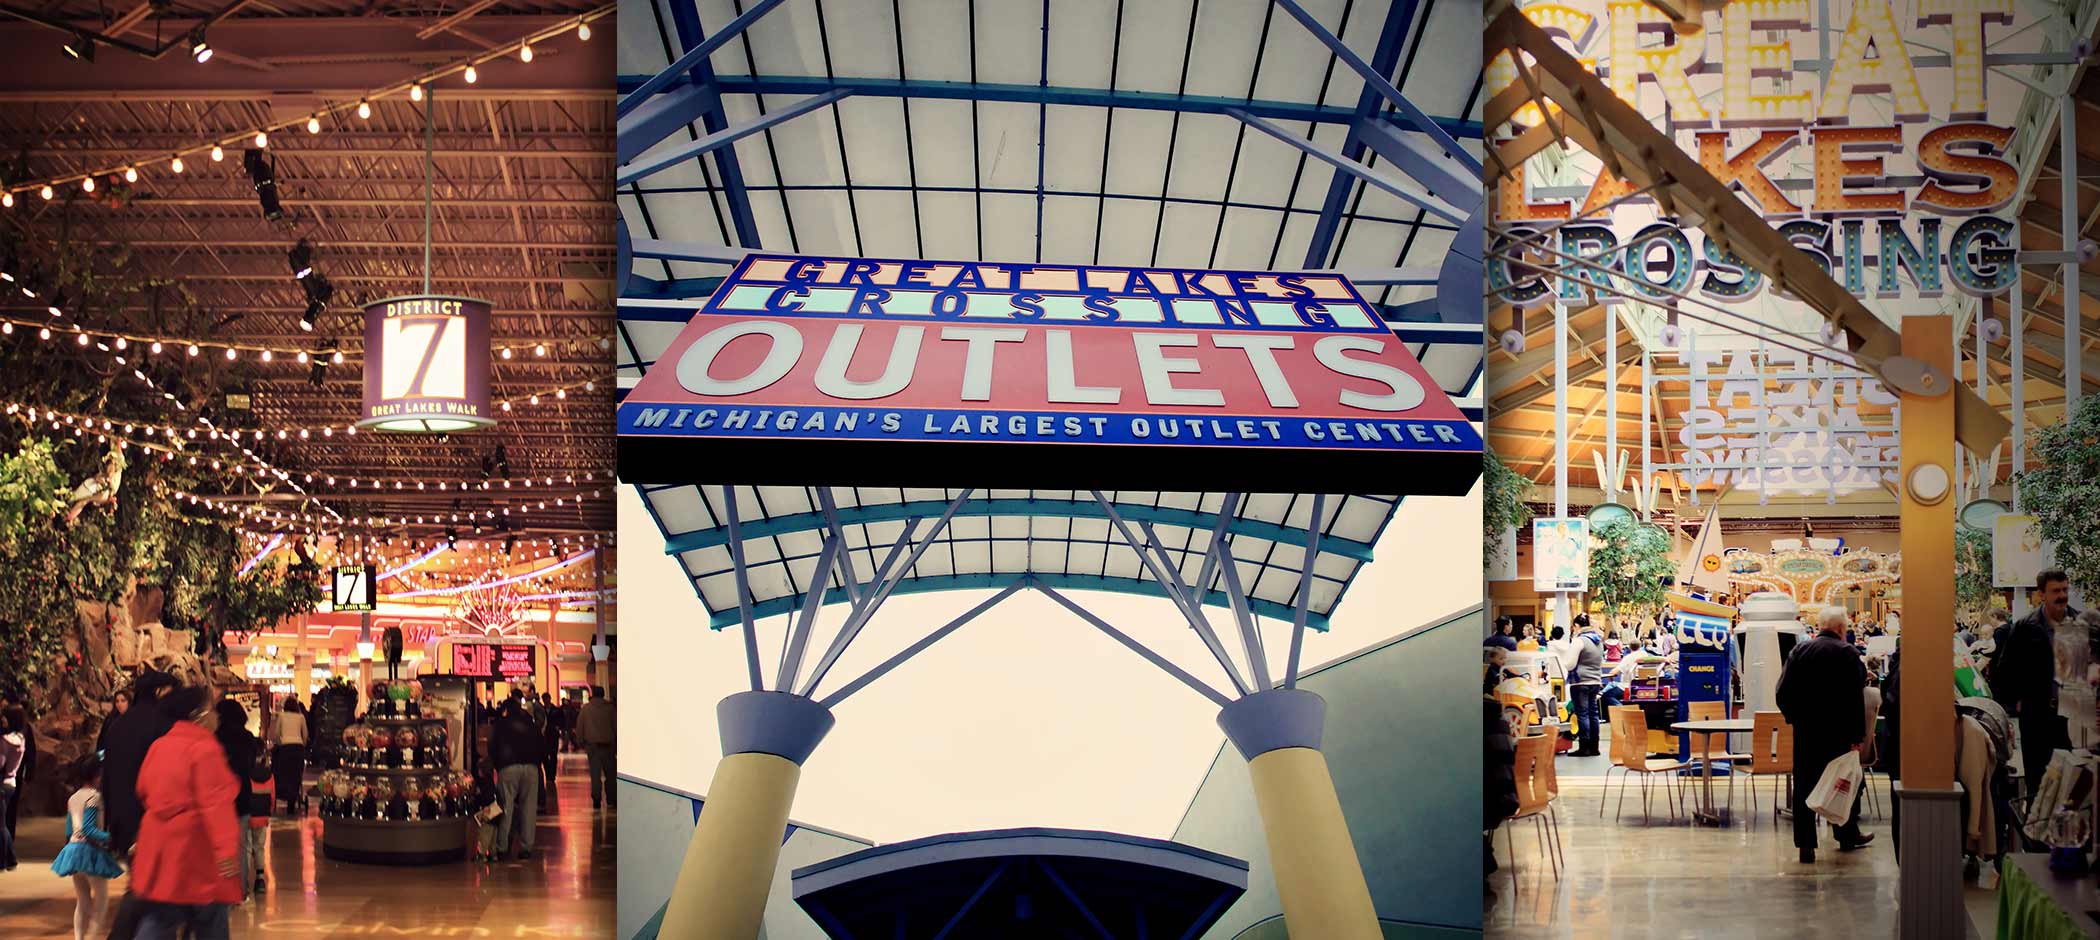 Great Lakes Crossing Outlets | Outlet Malls Detroit 